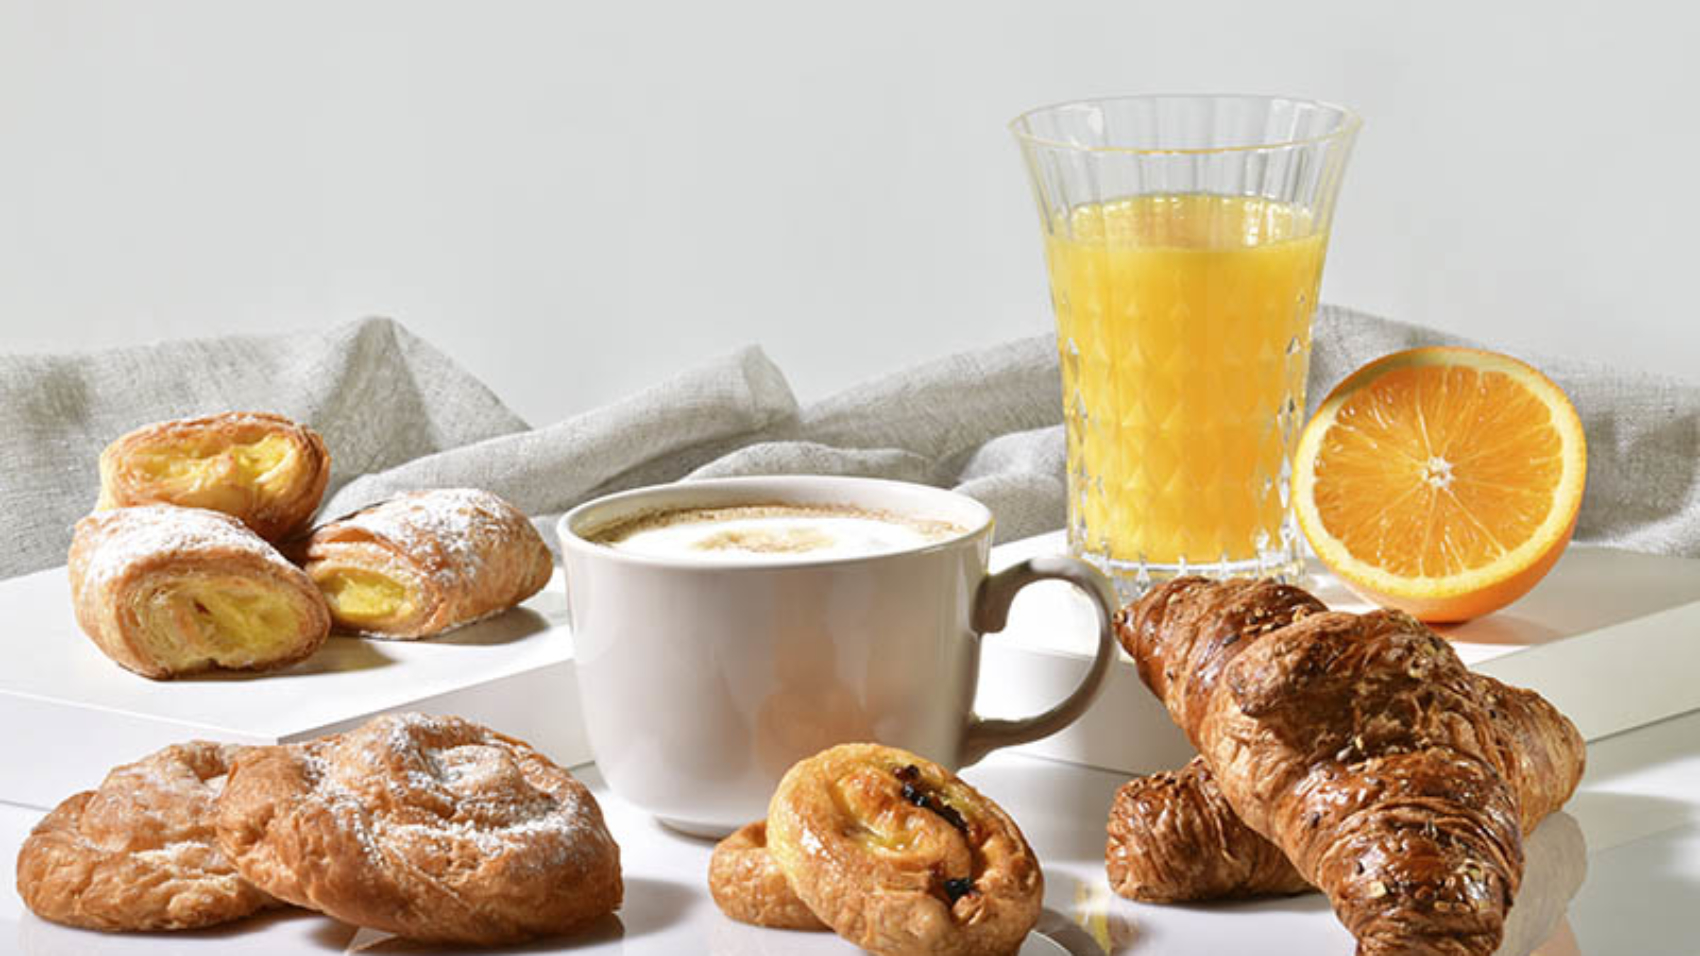 Cup of coffee surrounded by delicious pastries, with an orange juice and half orange at the back on a light background. Traditional breakfast concept.